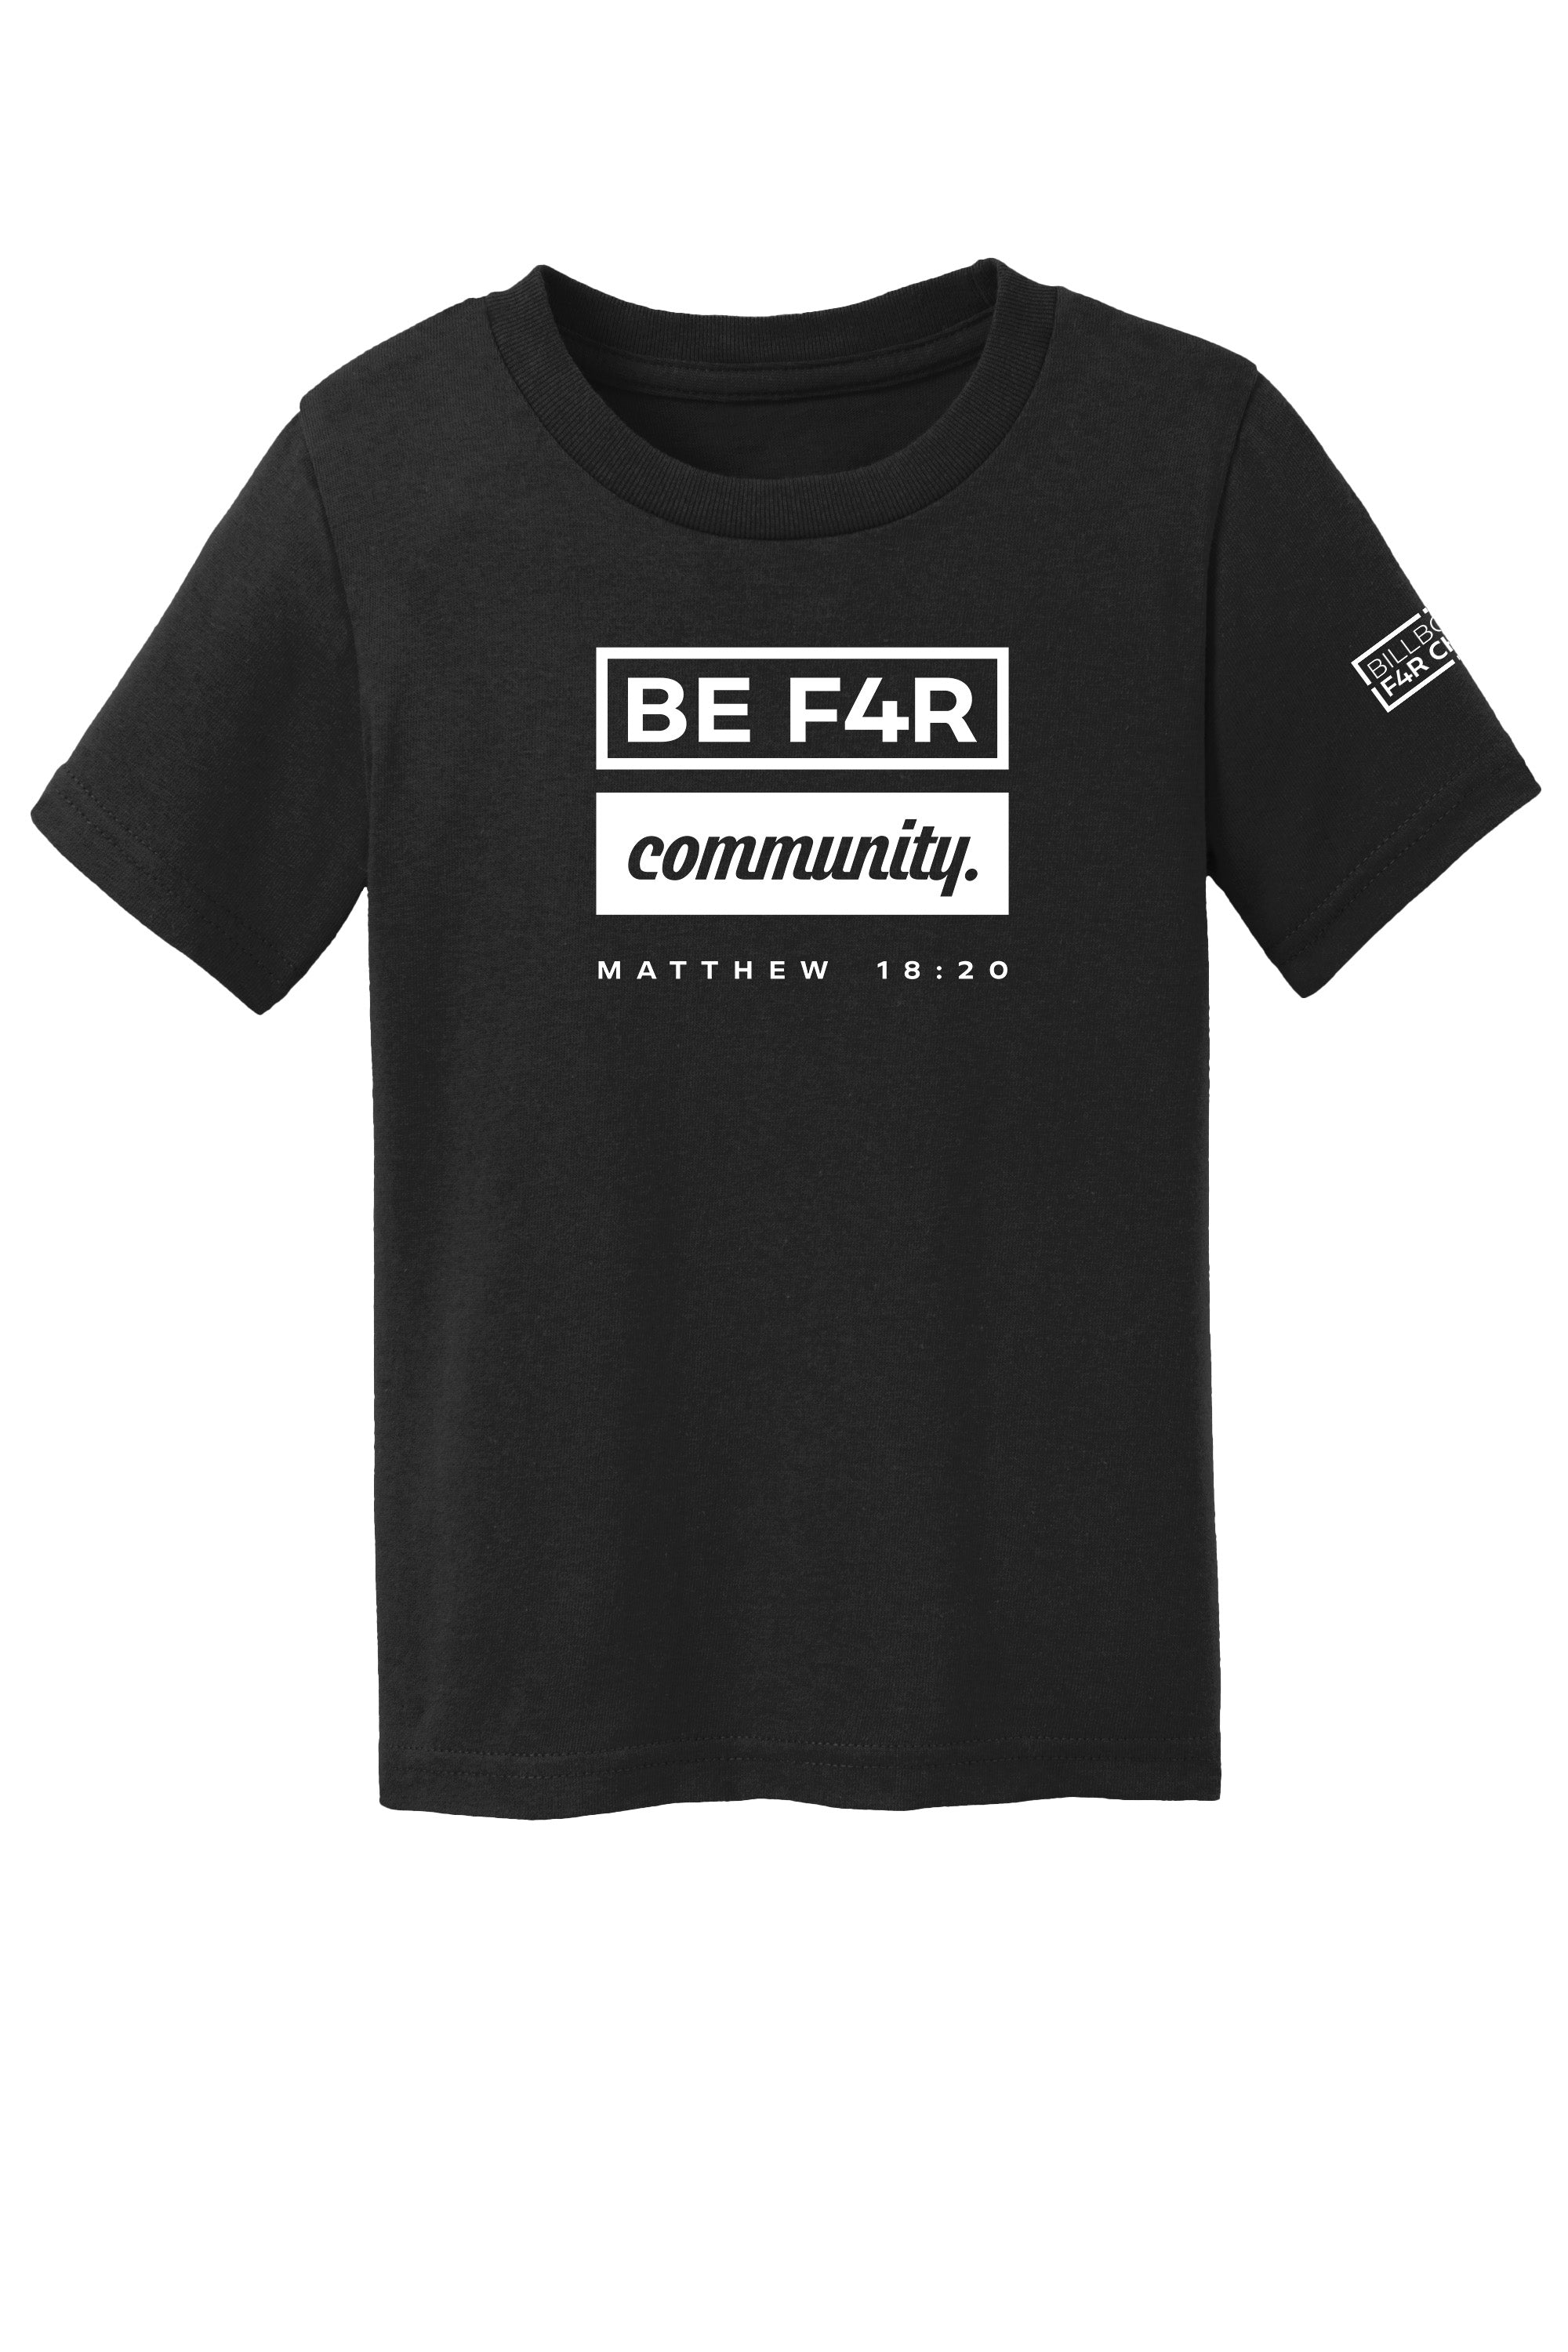 BE F4R Community 2 Toddler T-Shirt